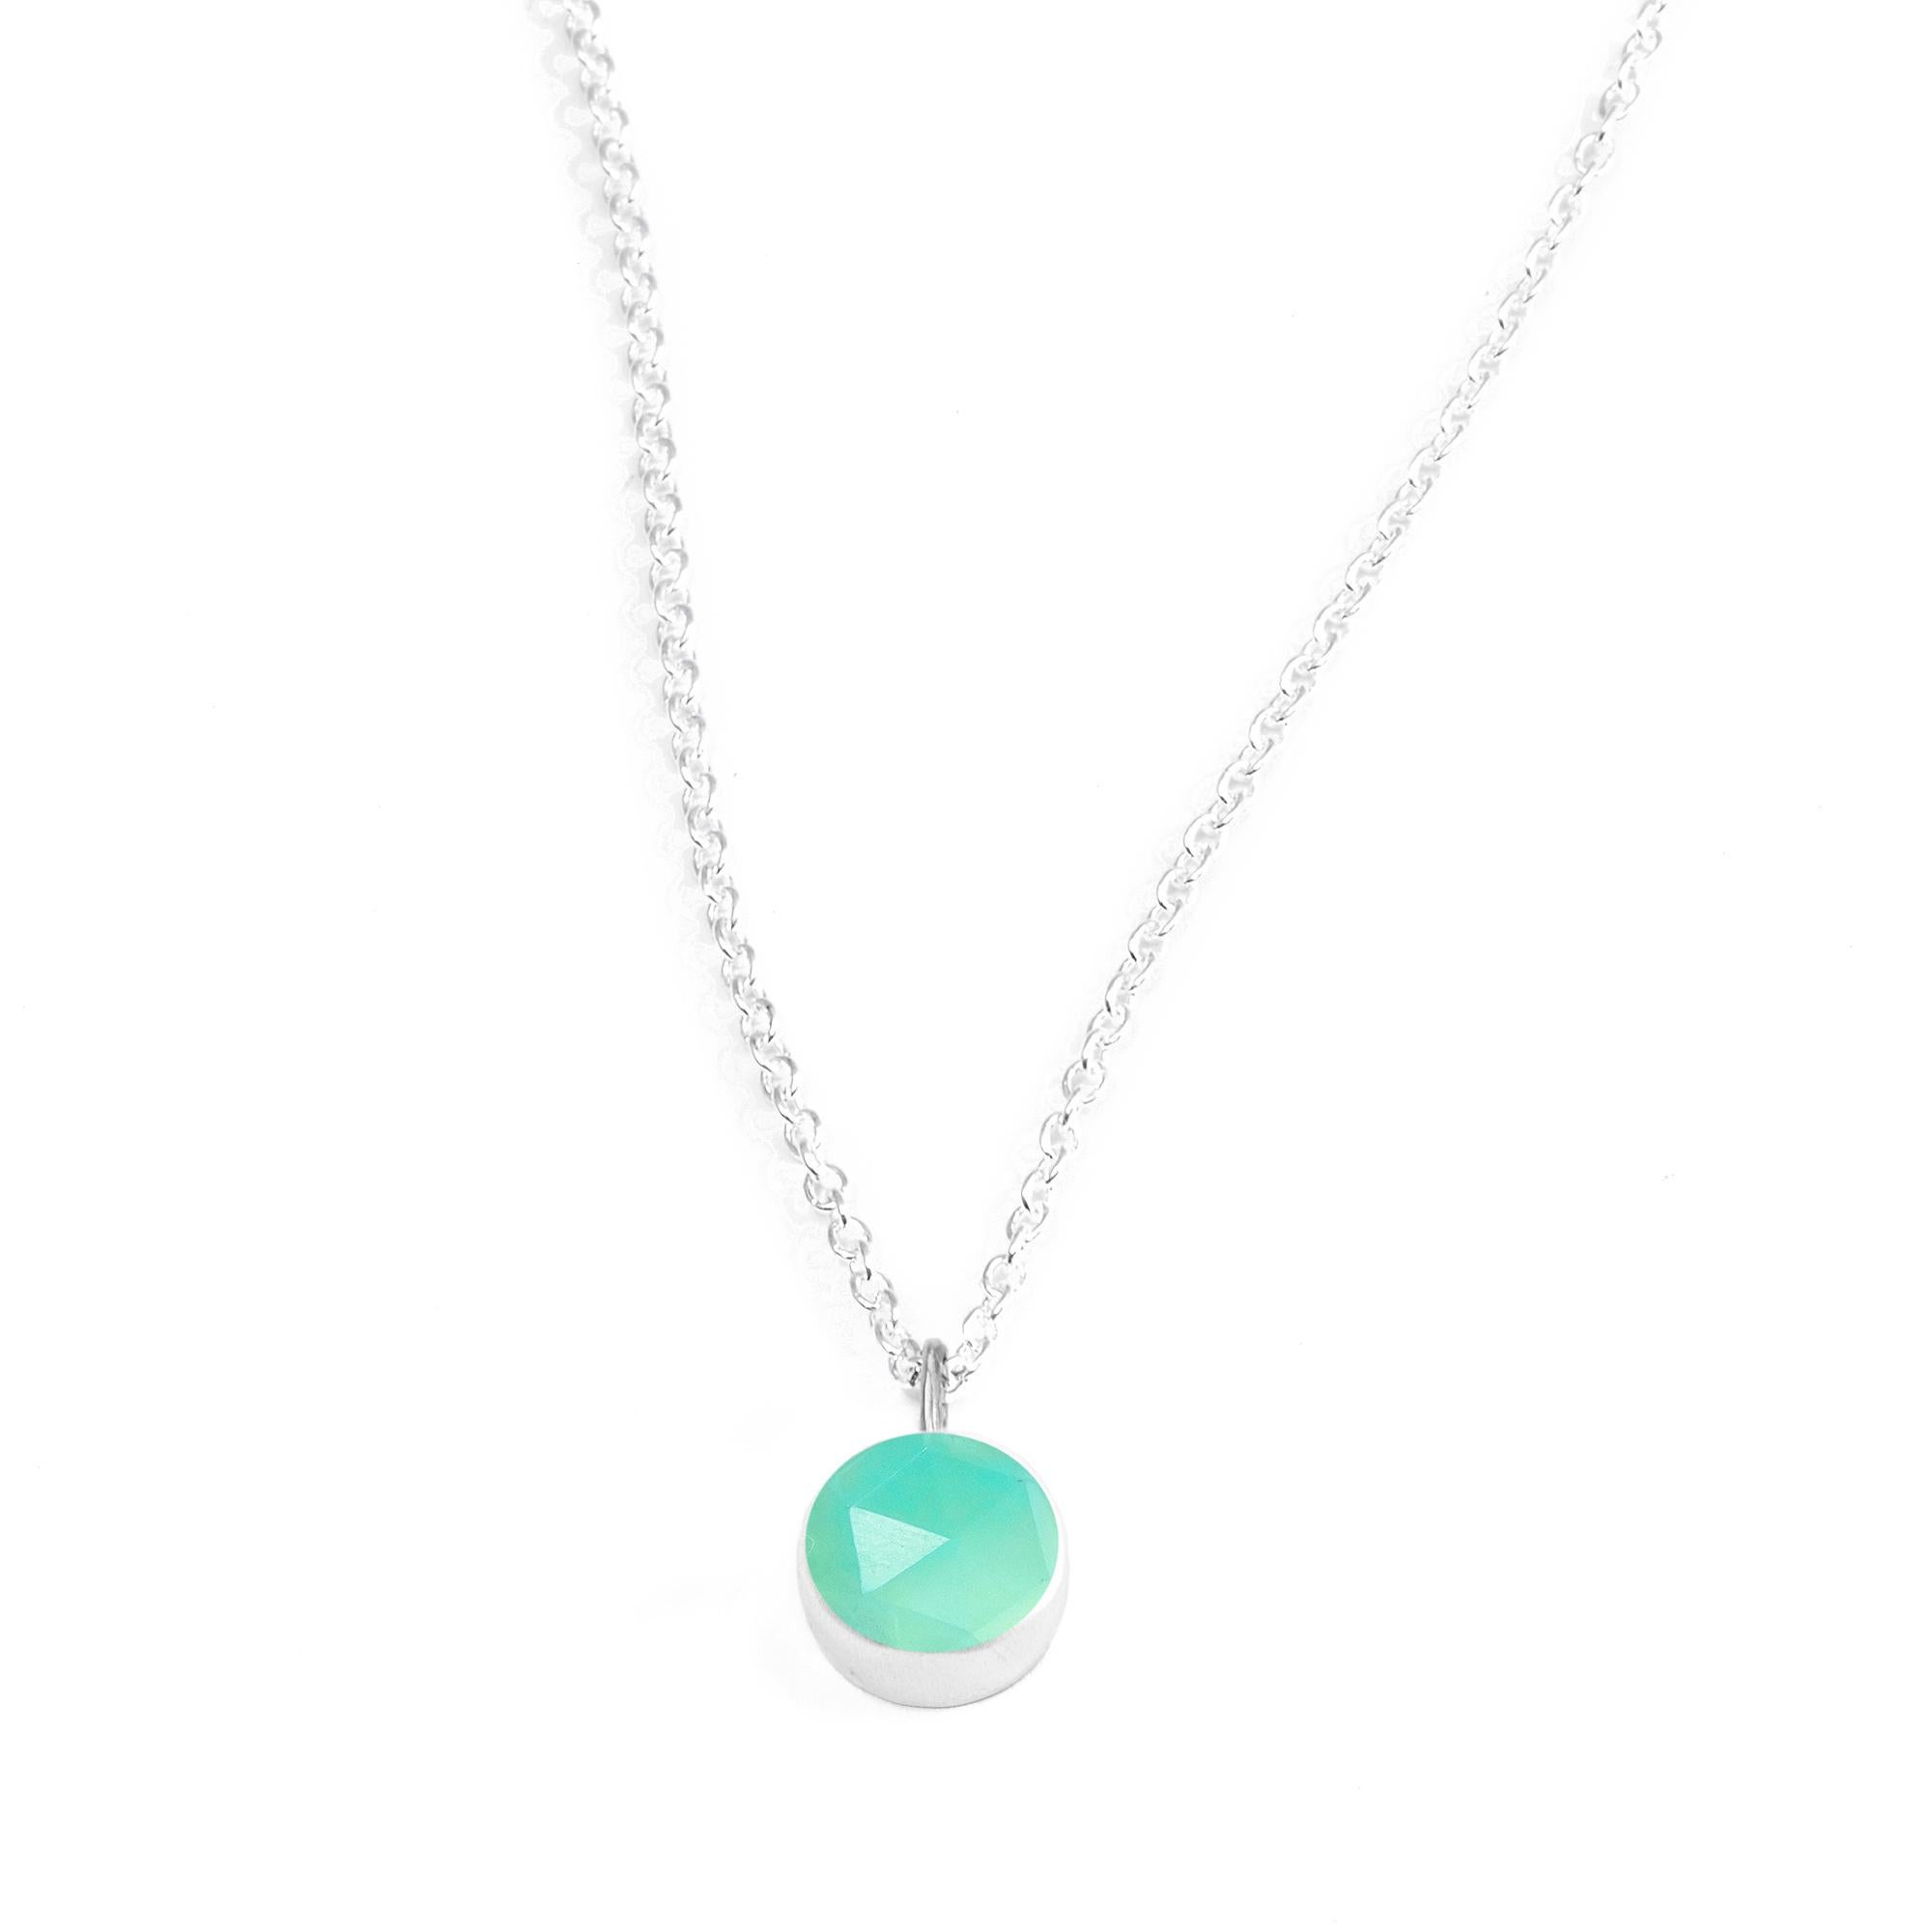 Made with chrysoprase rimmed in a textured silver bezel, our Petal Silver Necklace is a natural complement to your personal style

Stone carat: 3.5
Length: 16-18''
Stone size: 10mm

About The Stones:
Genuine Chrysoprase
A distinctive and very rare